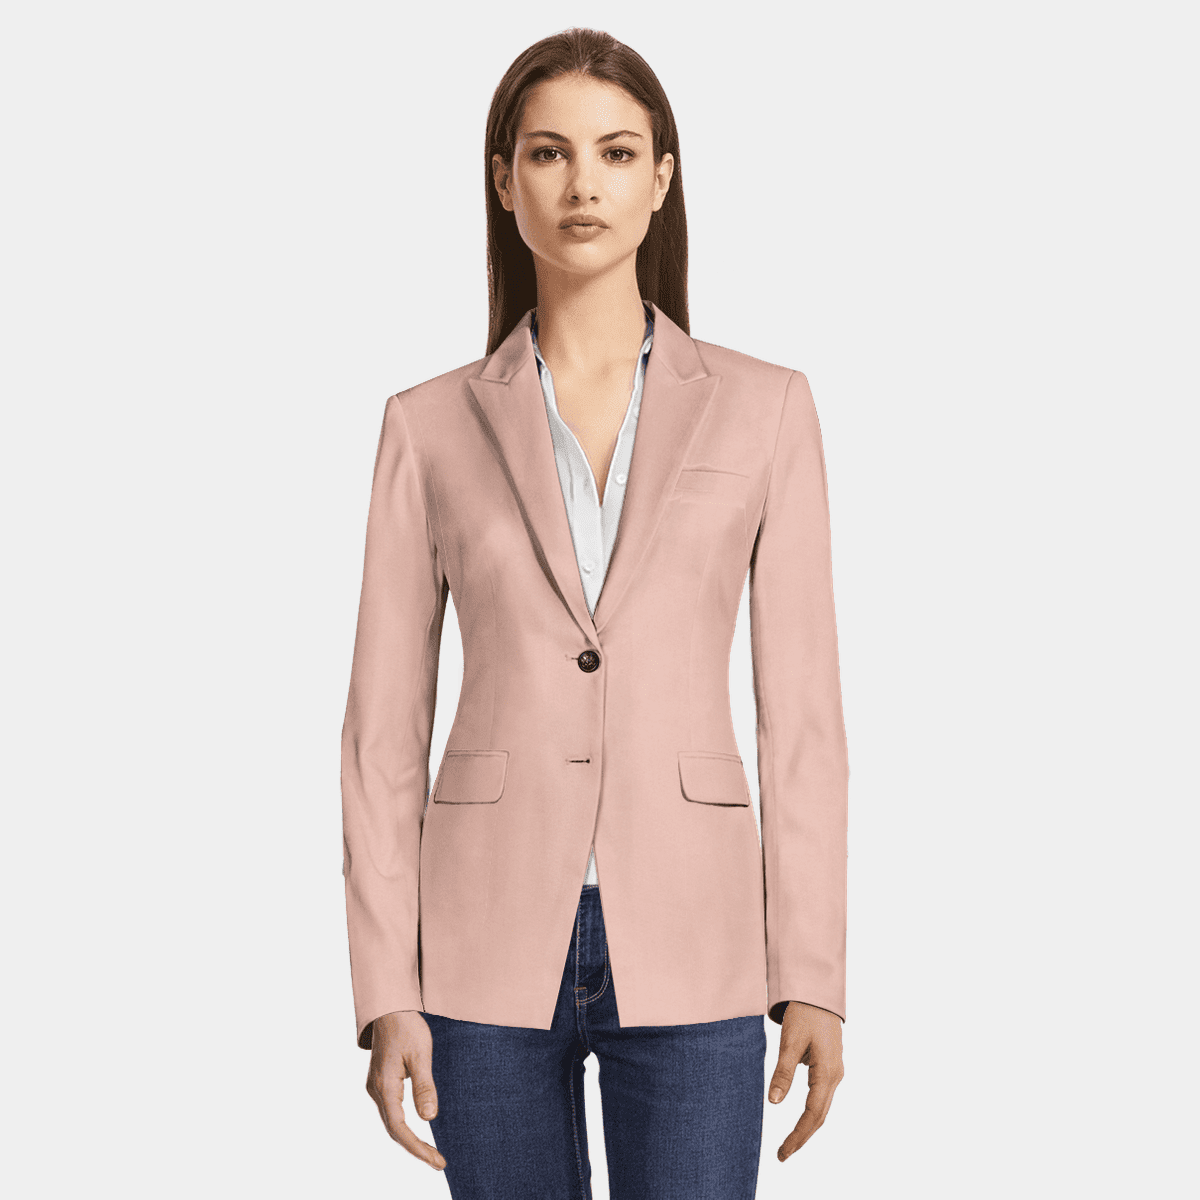 Pink Blazer with Blue Pants